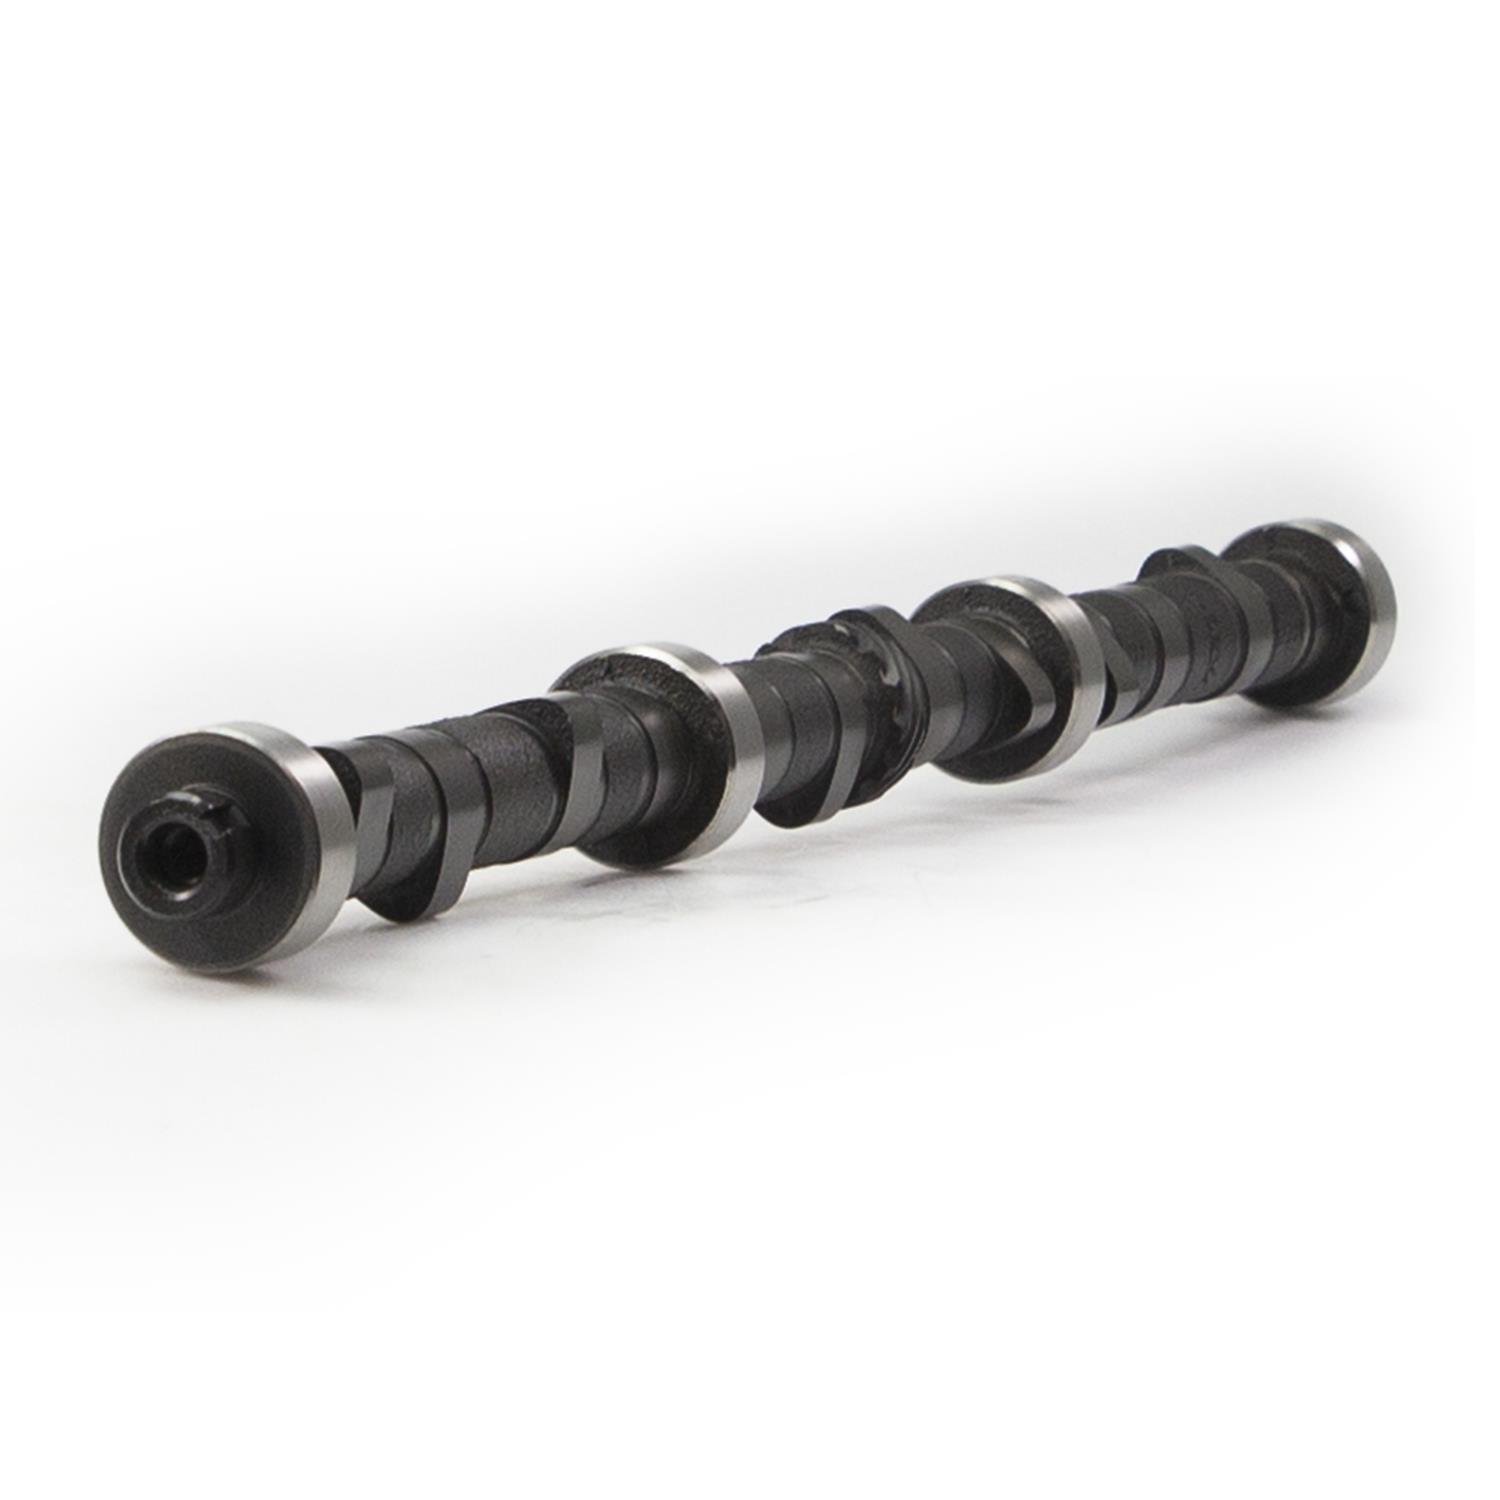 'Xtreme 4x4' Hydraulic Flat Tappet Camshaft for Select